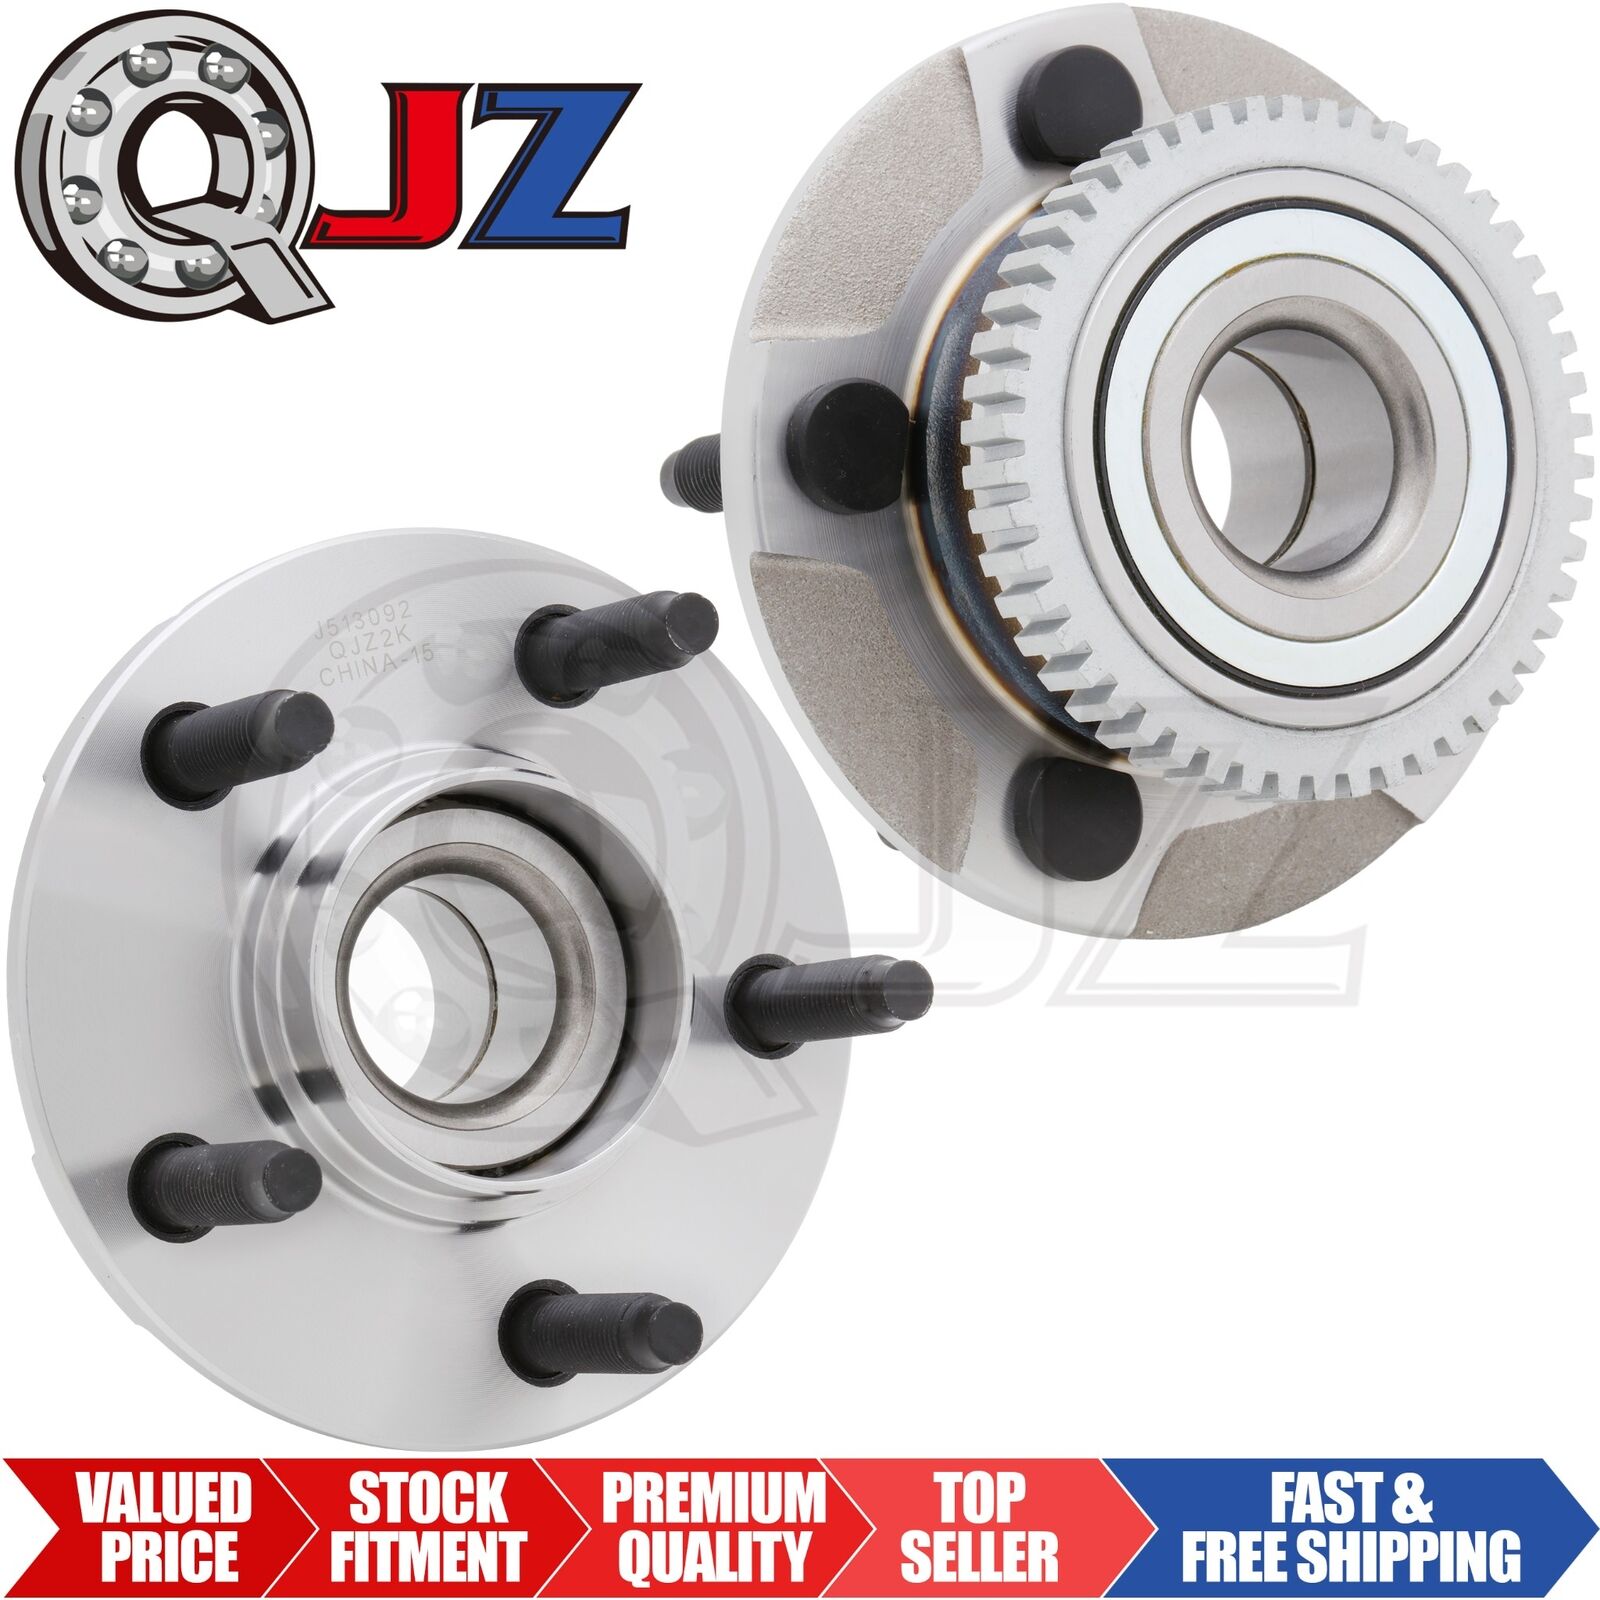 [FRONT(Qty.2pcs)] 513092 New Wheel Hub Assembly for 1992 Lincoln Mark VII RWD